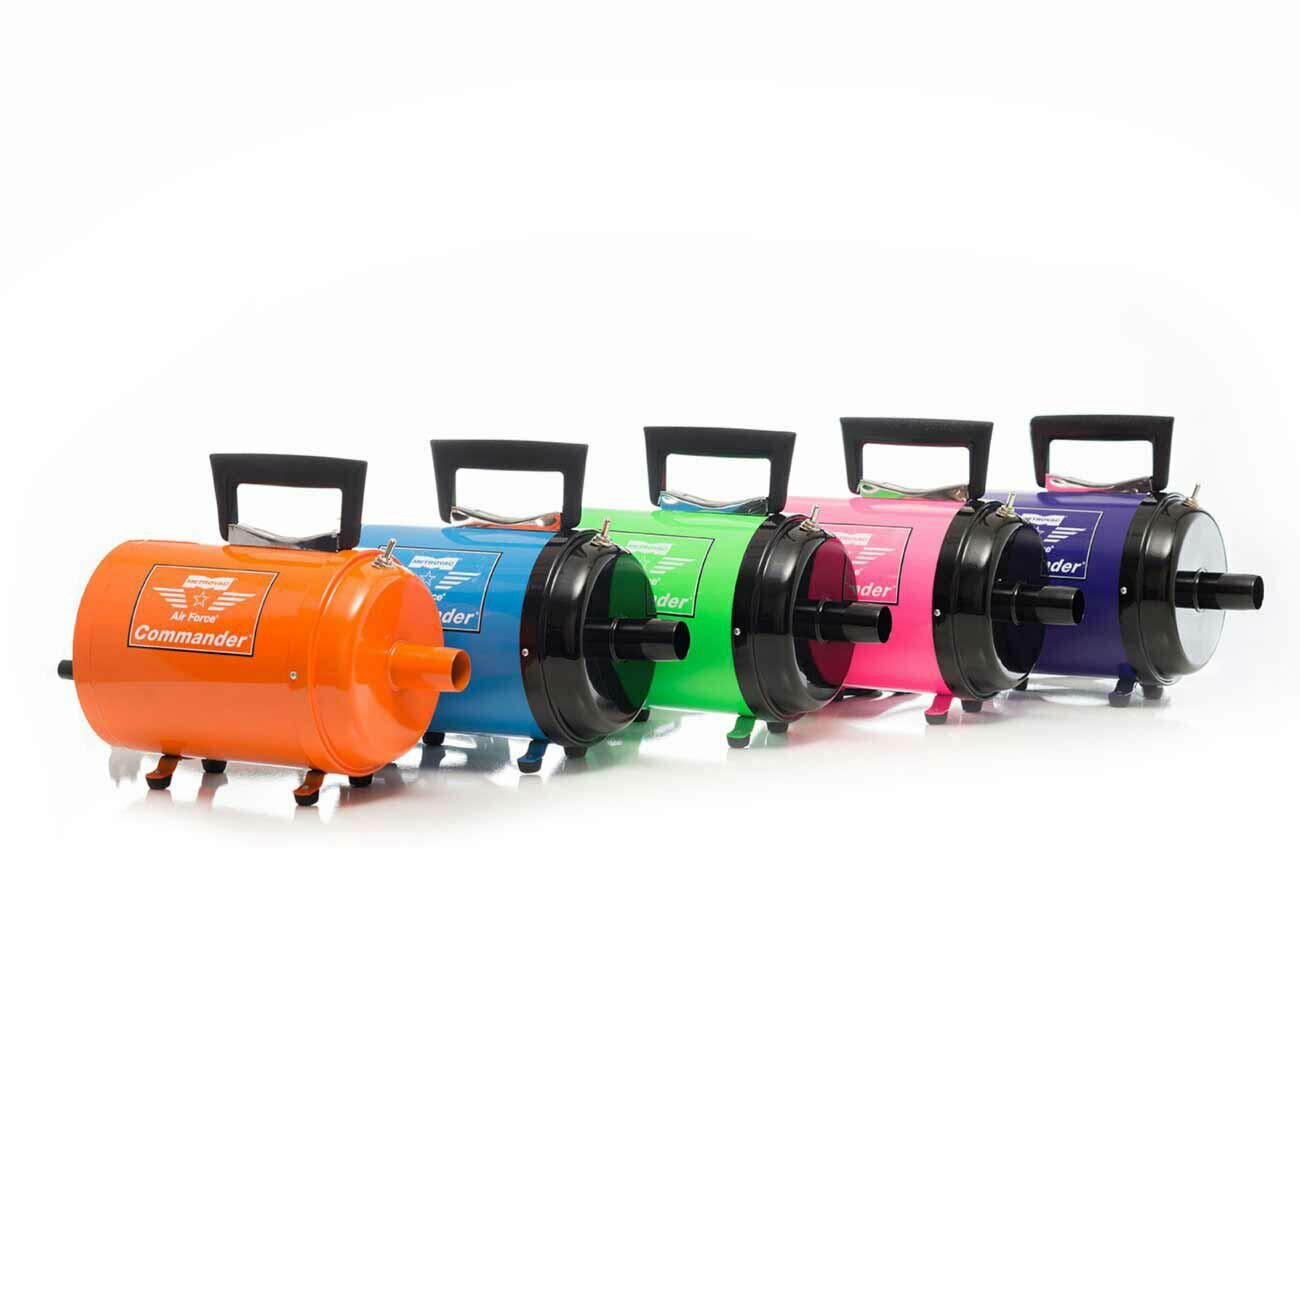 professional dog dryers Metro blower in crazy colors - Limited Edition